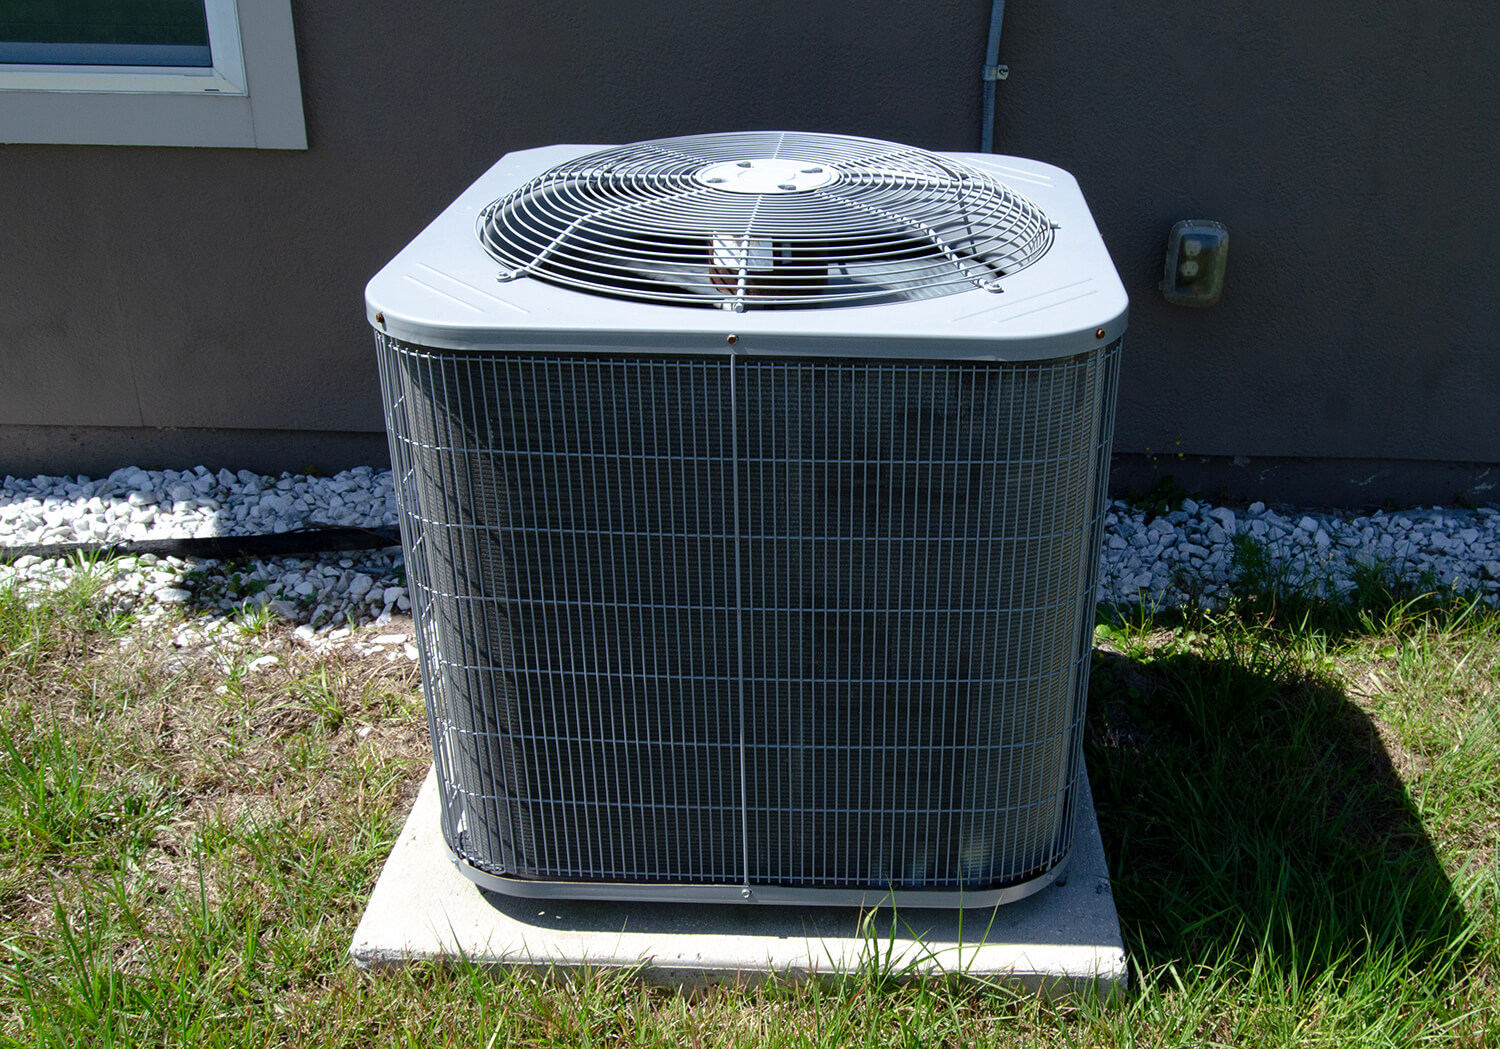 AC breaks at the Heating and Air Conditioning repair shop